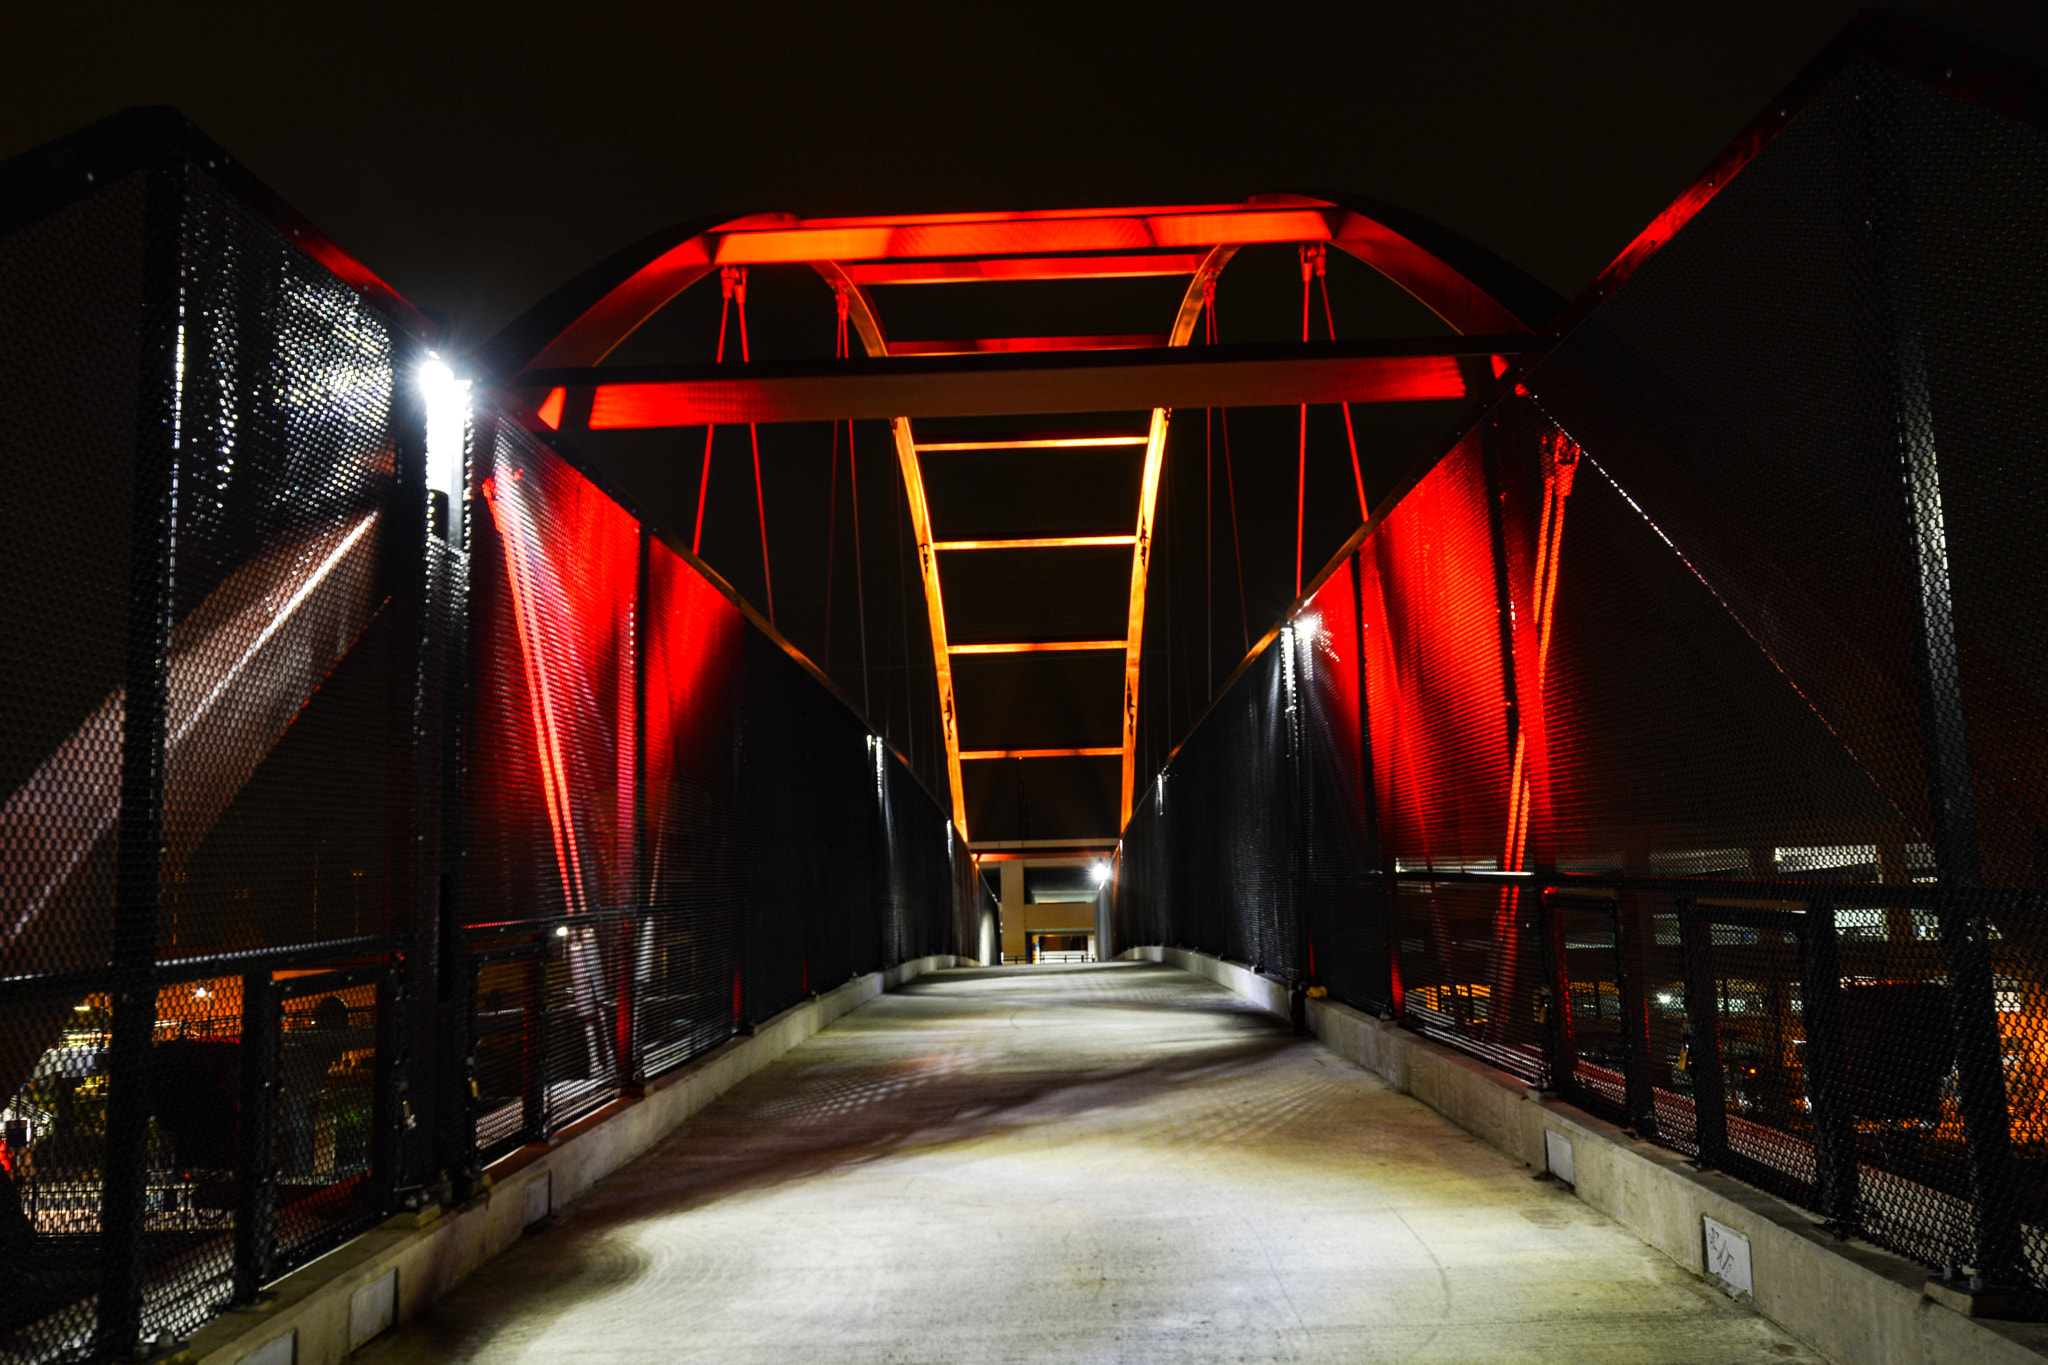 Nikon D5200 sample photo. Bridge over troubled waters photography